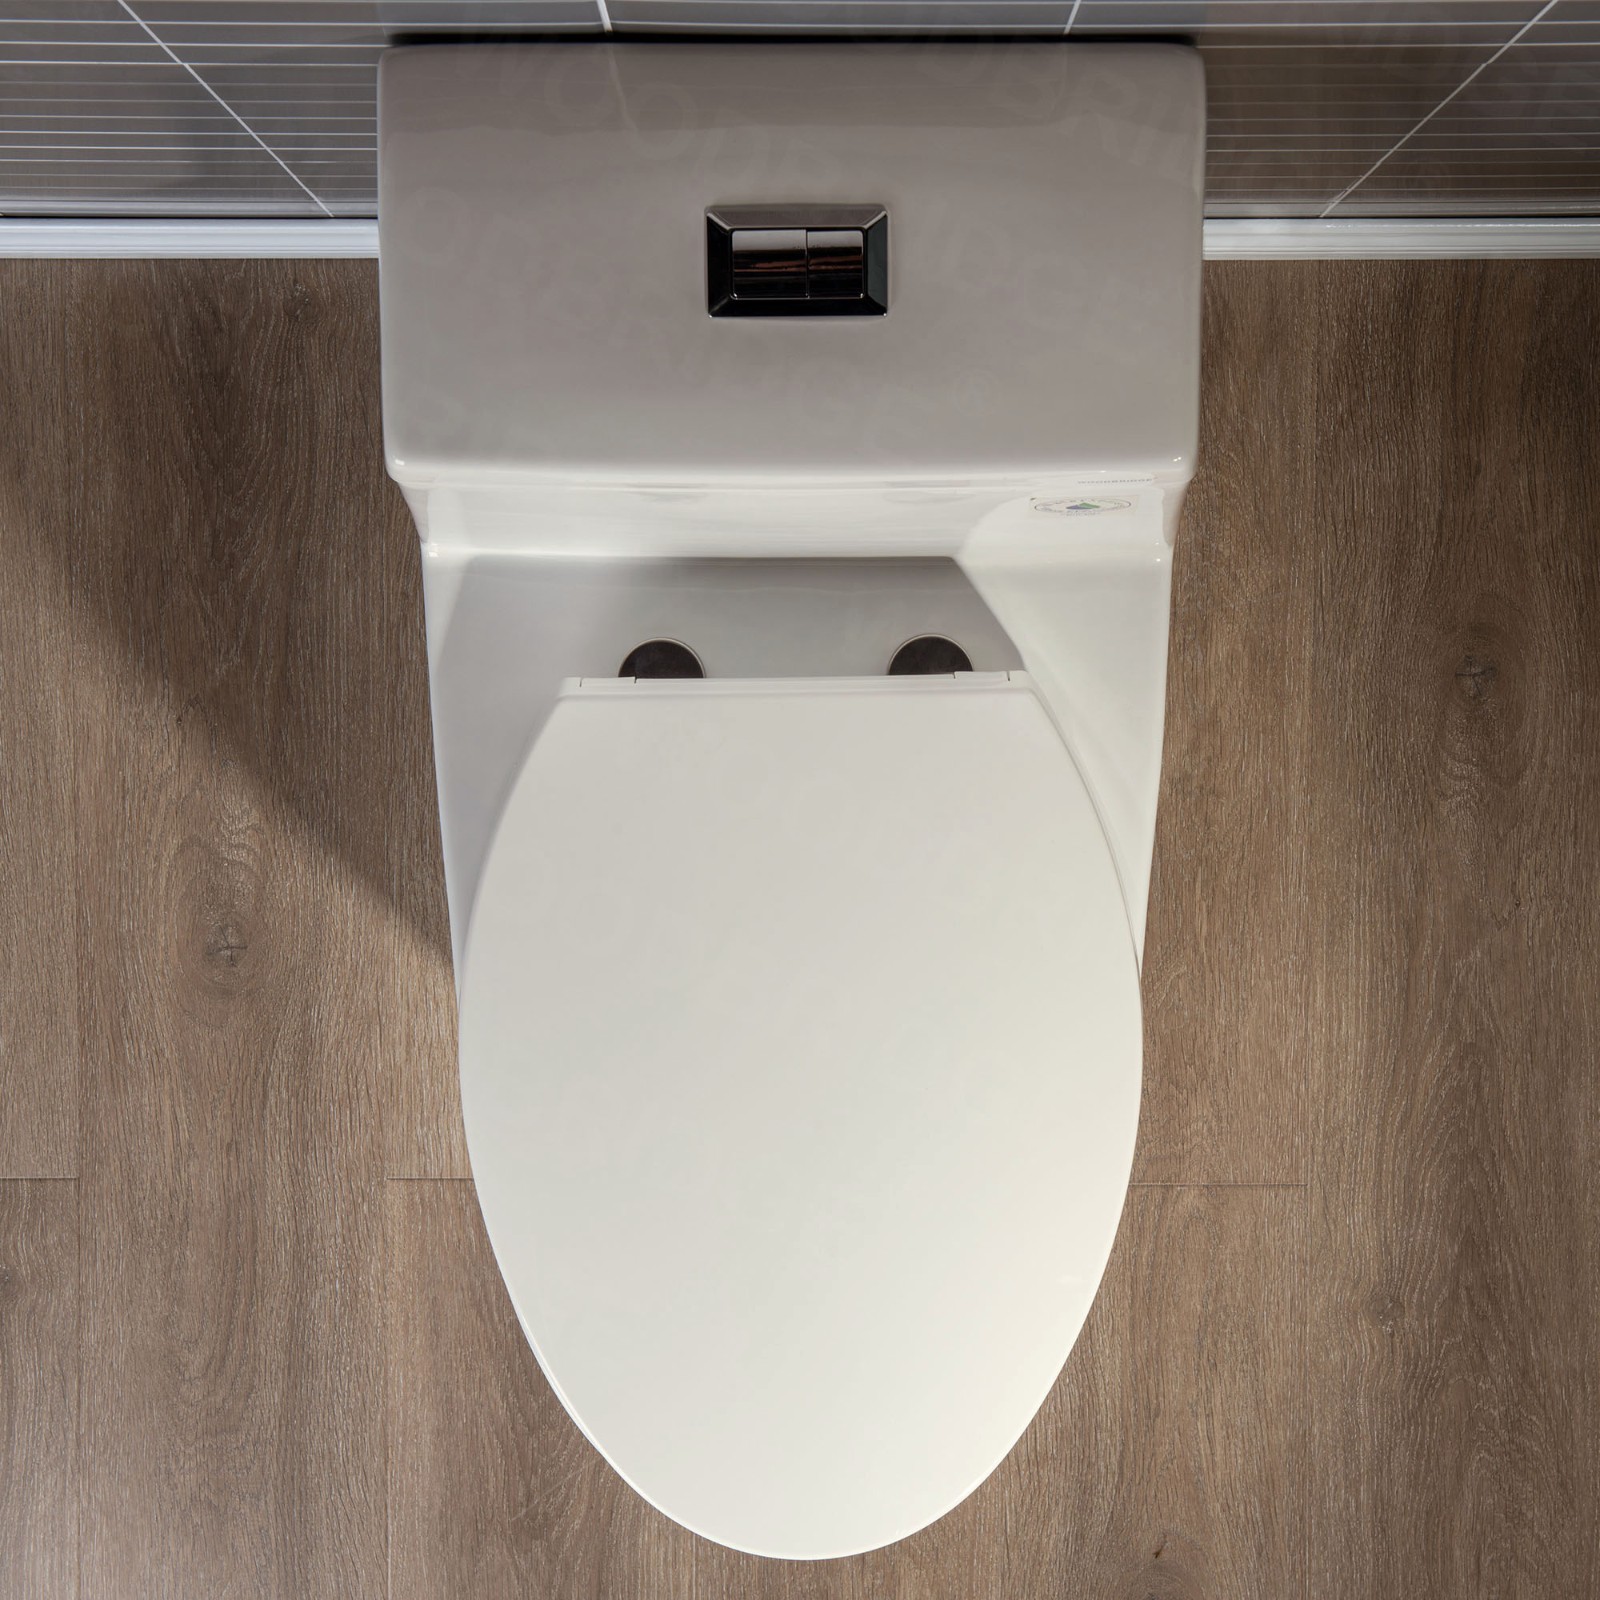  WOODBRIDGEE One Piece Toilet with Soft Closing Seat, Chair Height, 1.28 GPF Dual, Water Sensed, 1000 Gram MaP Flushing Score Toilet, B0942, Biscuit_5368